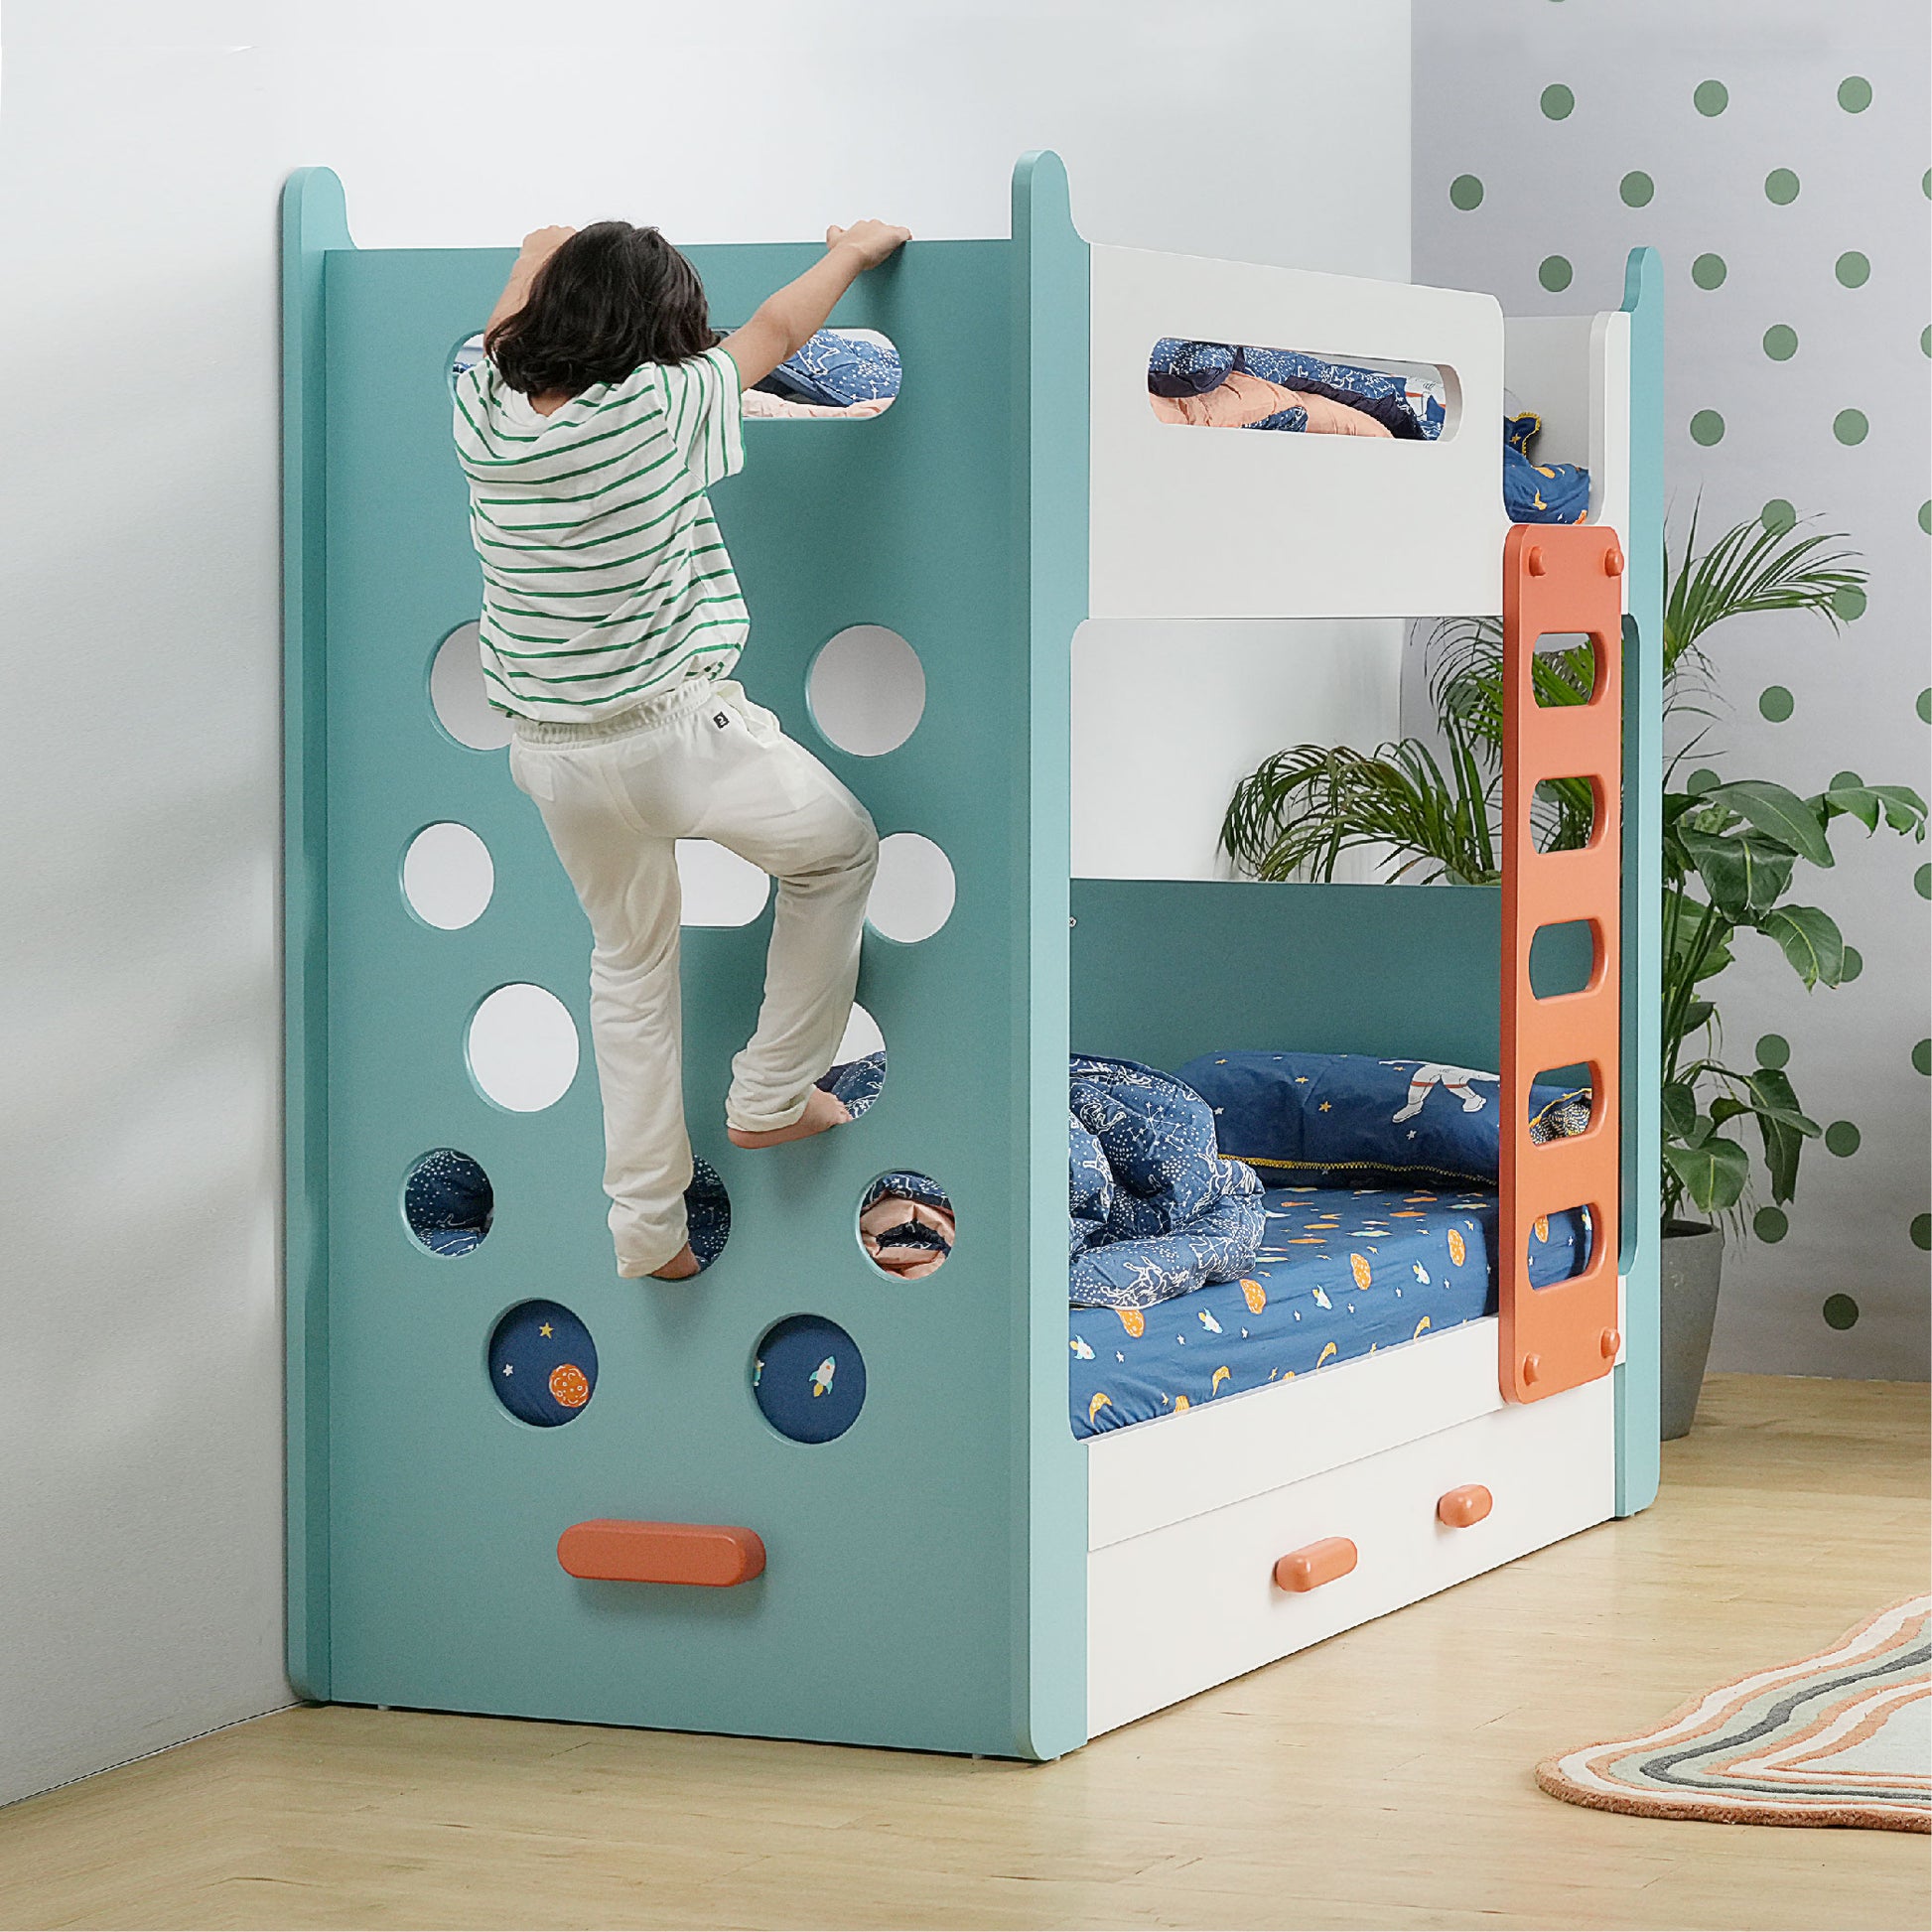 media_gallary Climbr Bunk Bed with 2 Mattresses 6